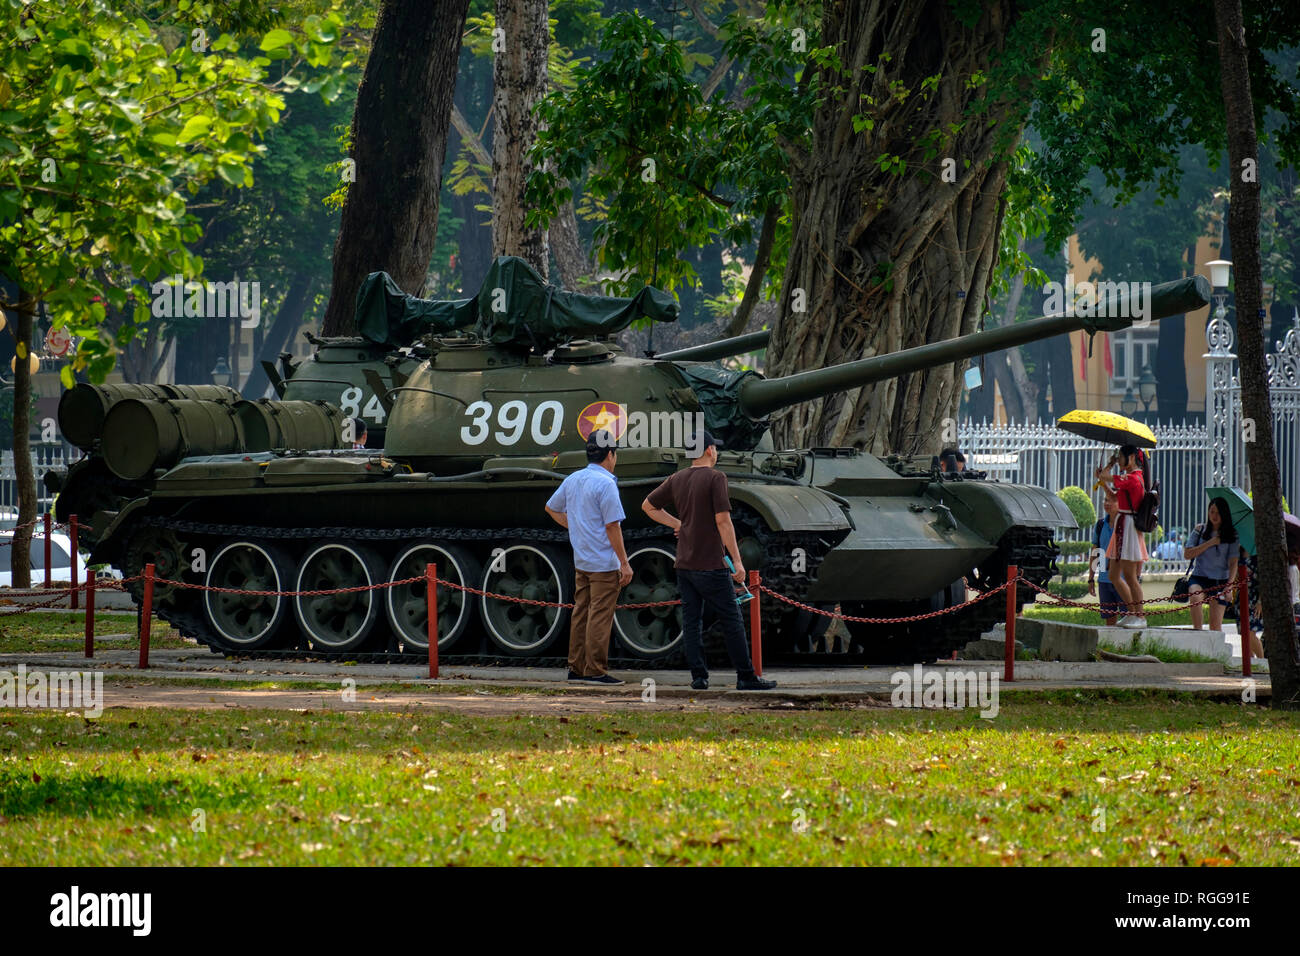 North Vietnamese army tank number 390 which rashed through the gates of the presidential palace in Saigon to put an end to the Vietnam War in 1975 Stock Photo